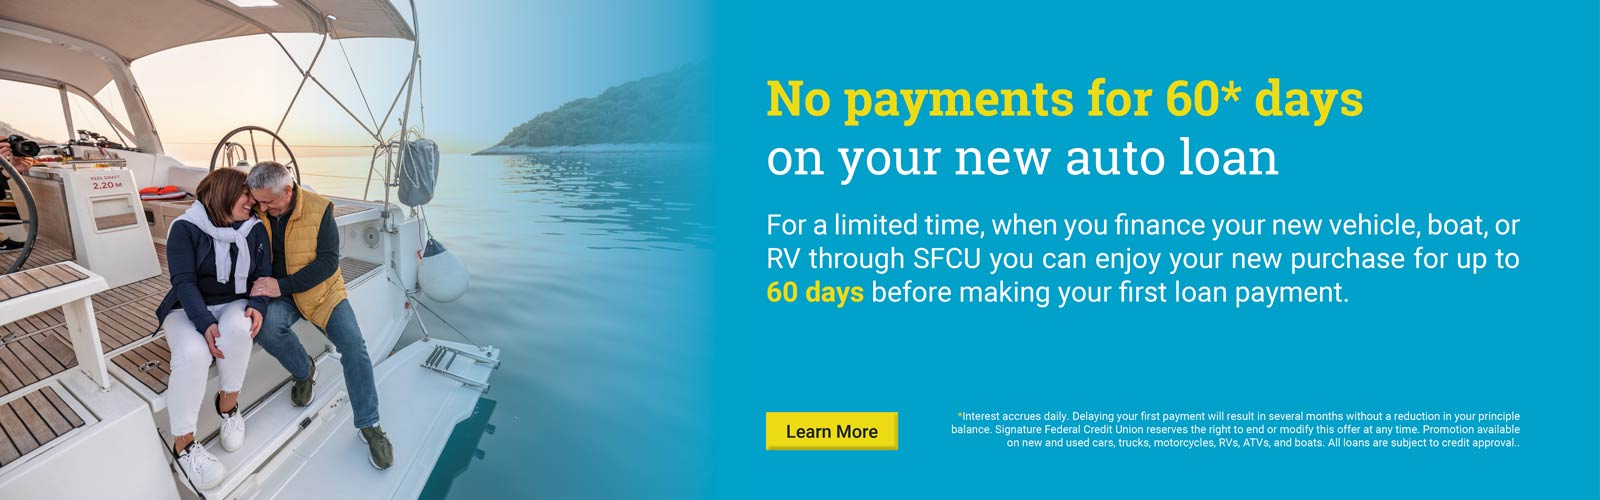 No payments for 60 days on your new auto loan